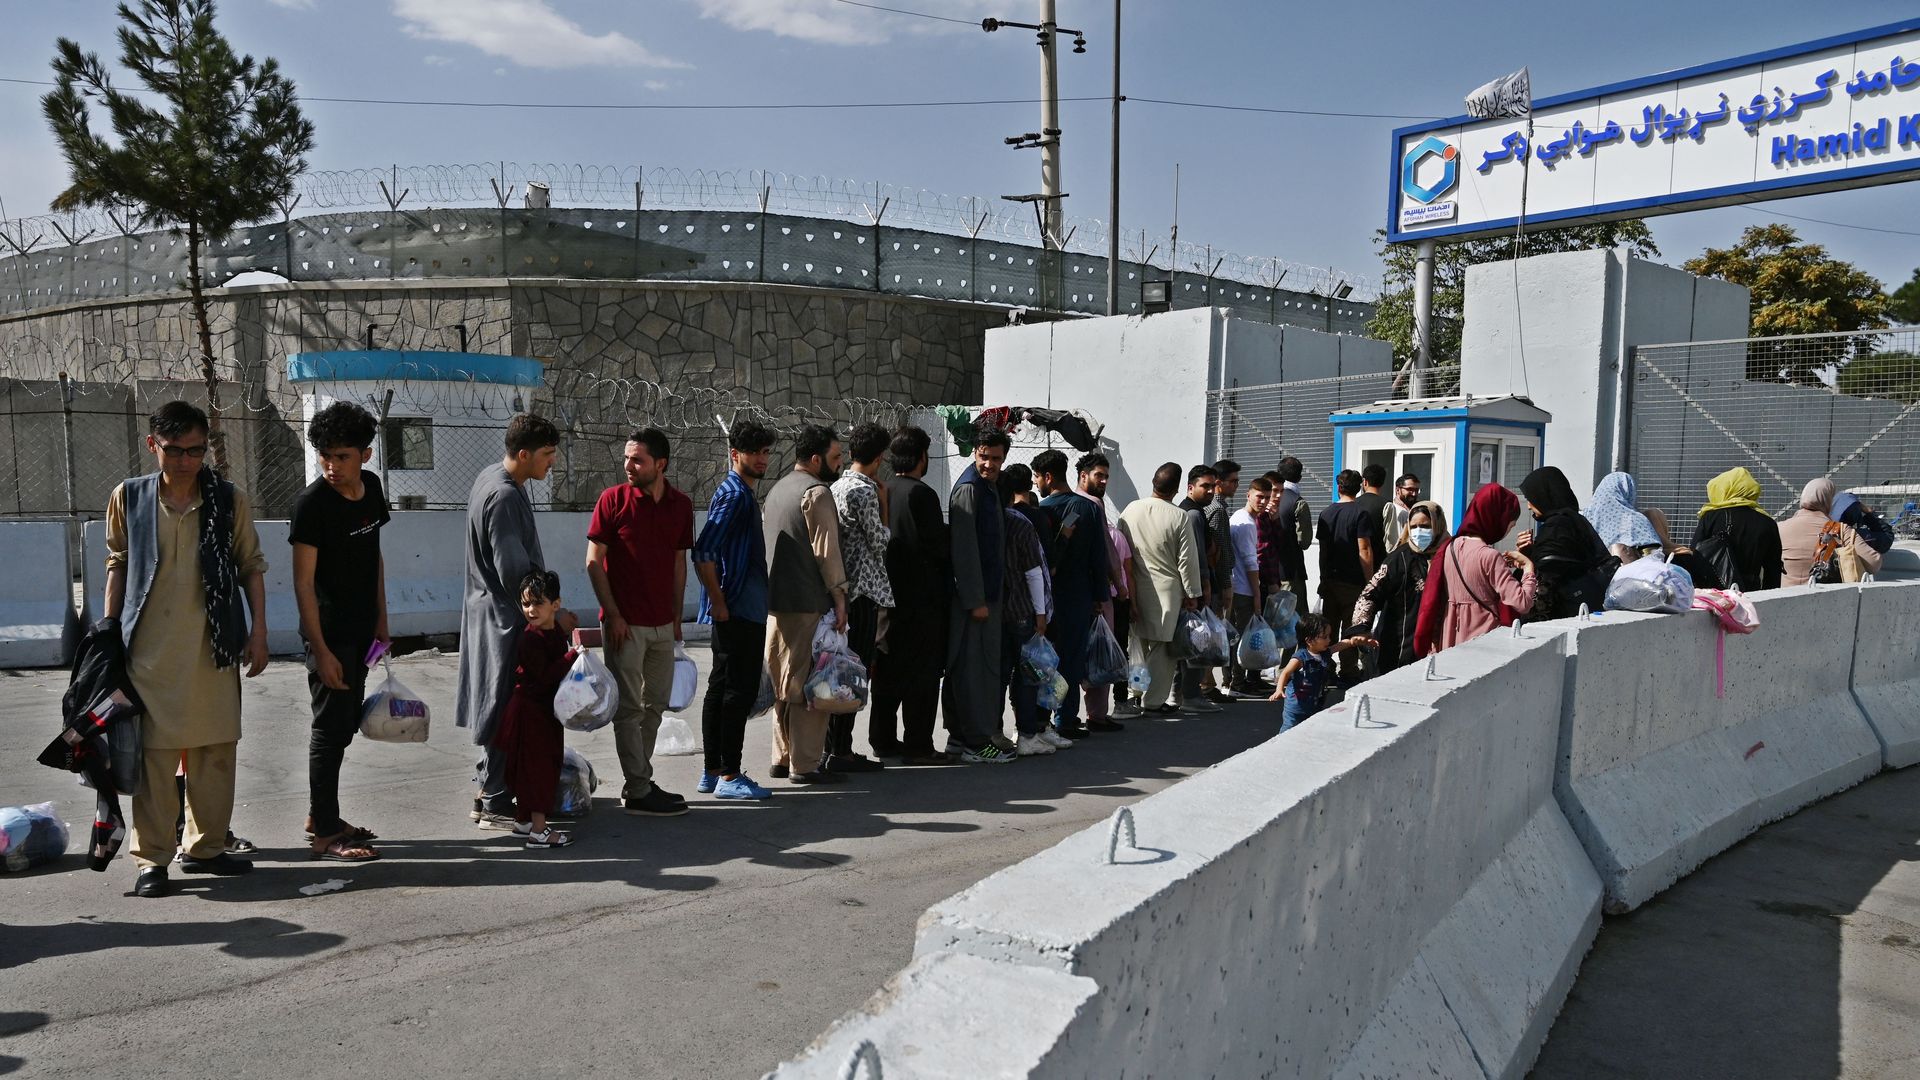 Afghans, hoping to leave Afghanistan, queue at the main entrance gate of Kabul airport in Kabul on August 28, 2021,